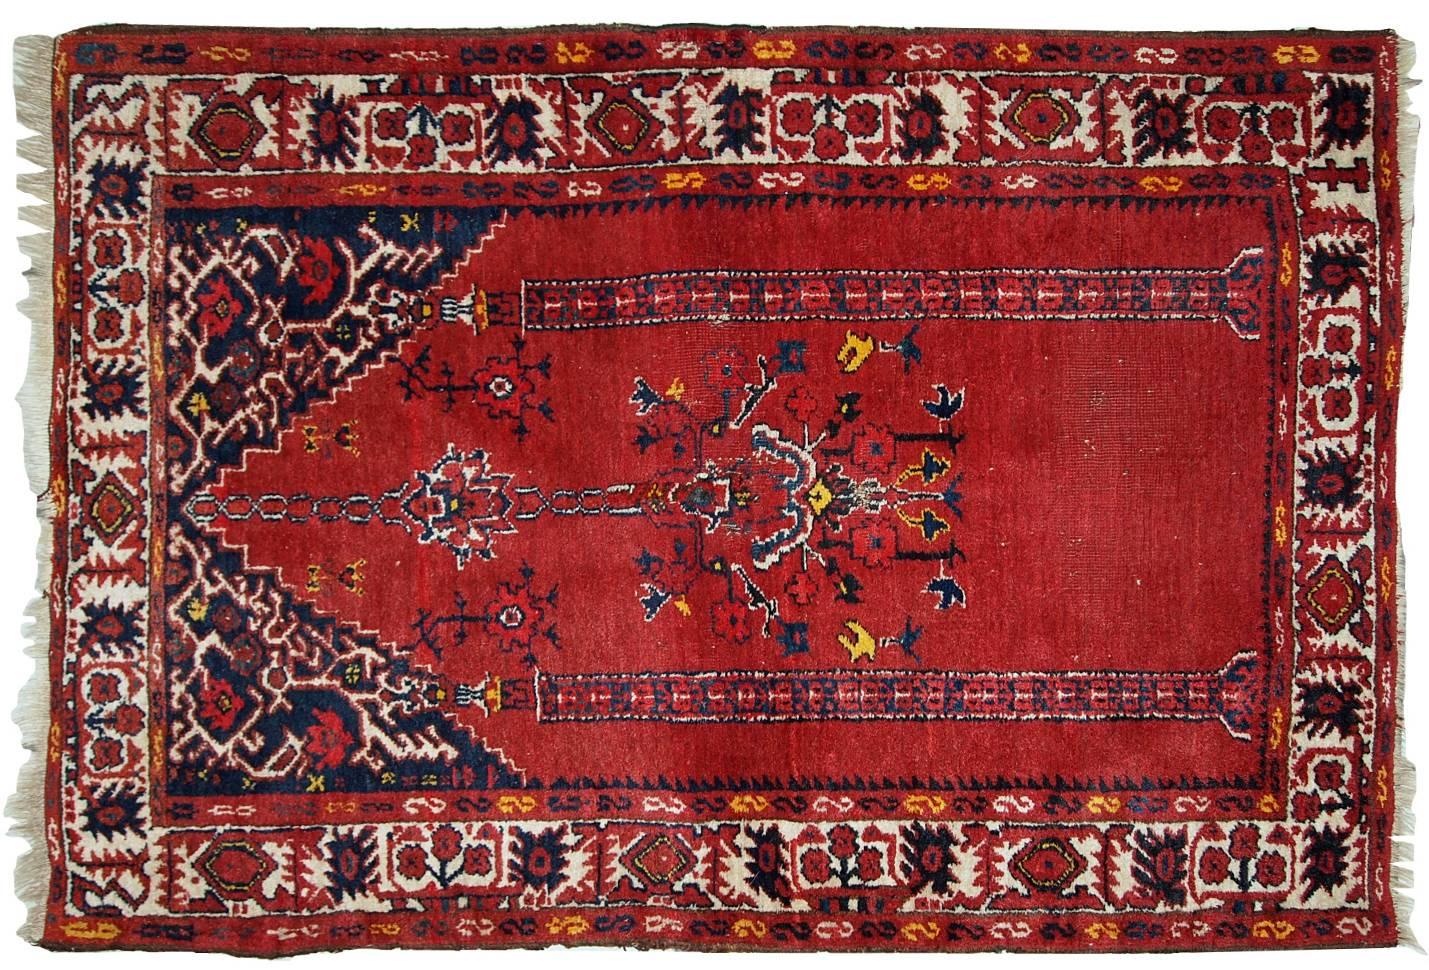 Vintage handmade Turkish prayer rug in bright red shade with yellow, white and navy blue details. The rug is in original condition, it has some low pile. Made out of soft wool.
 